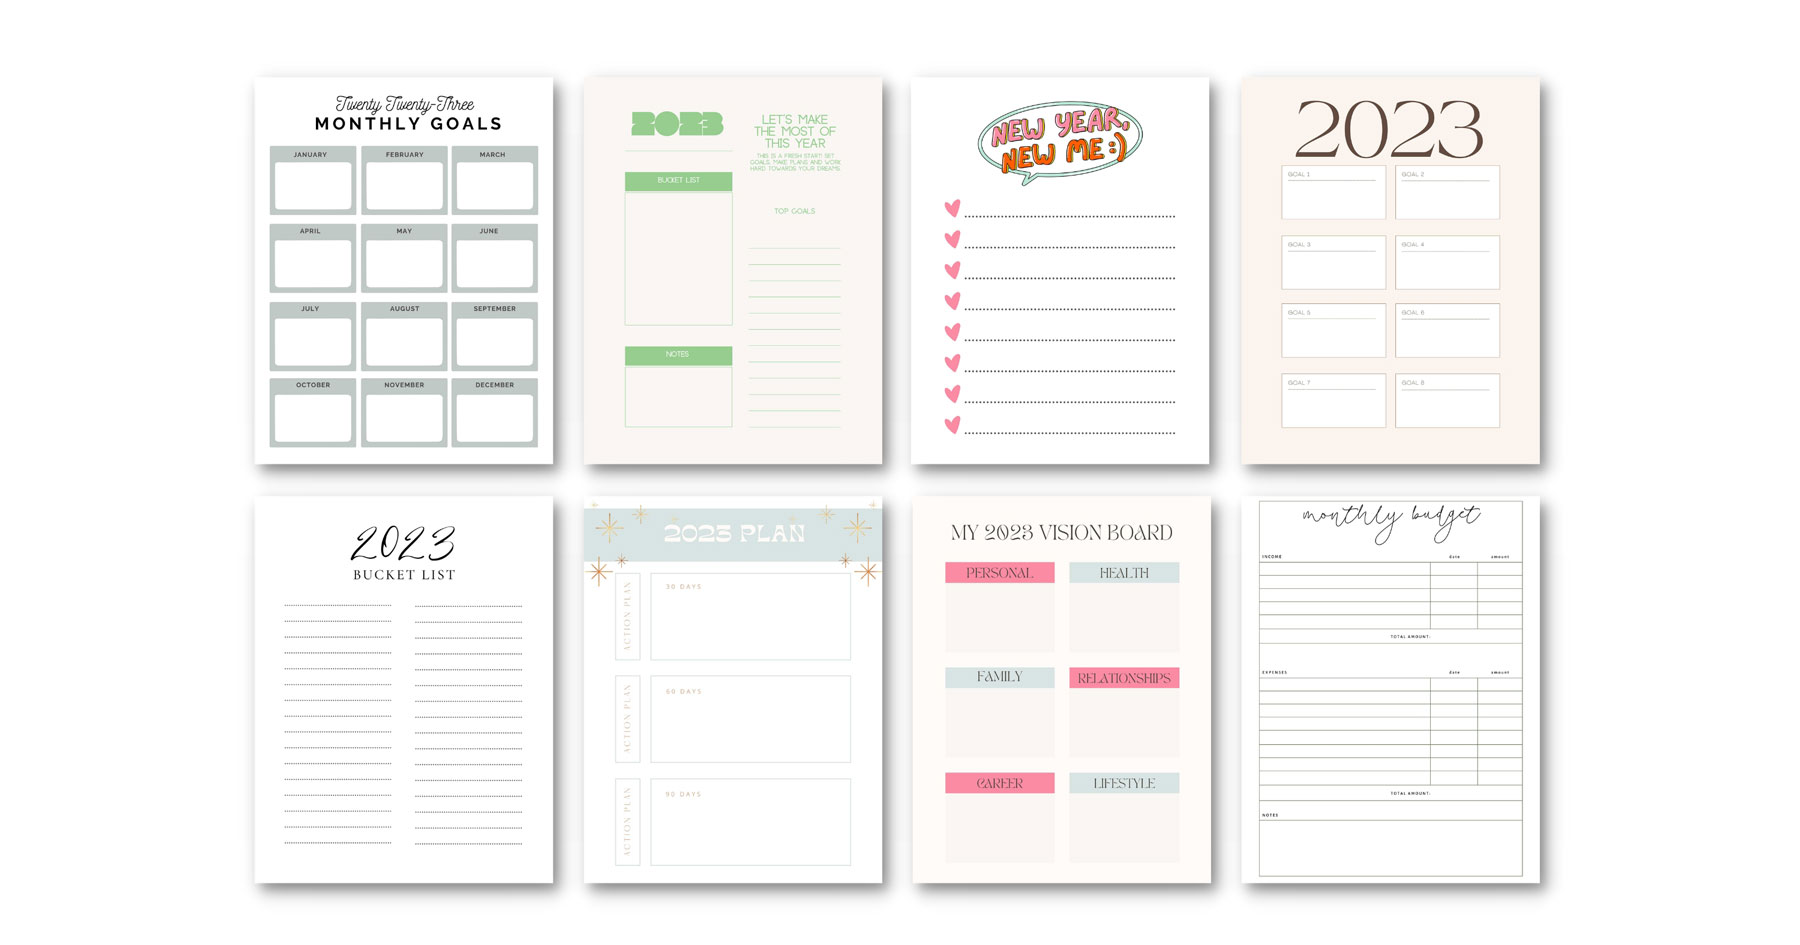 2023 New Year Goals & Free Download